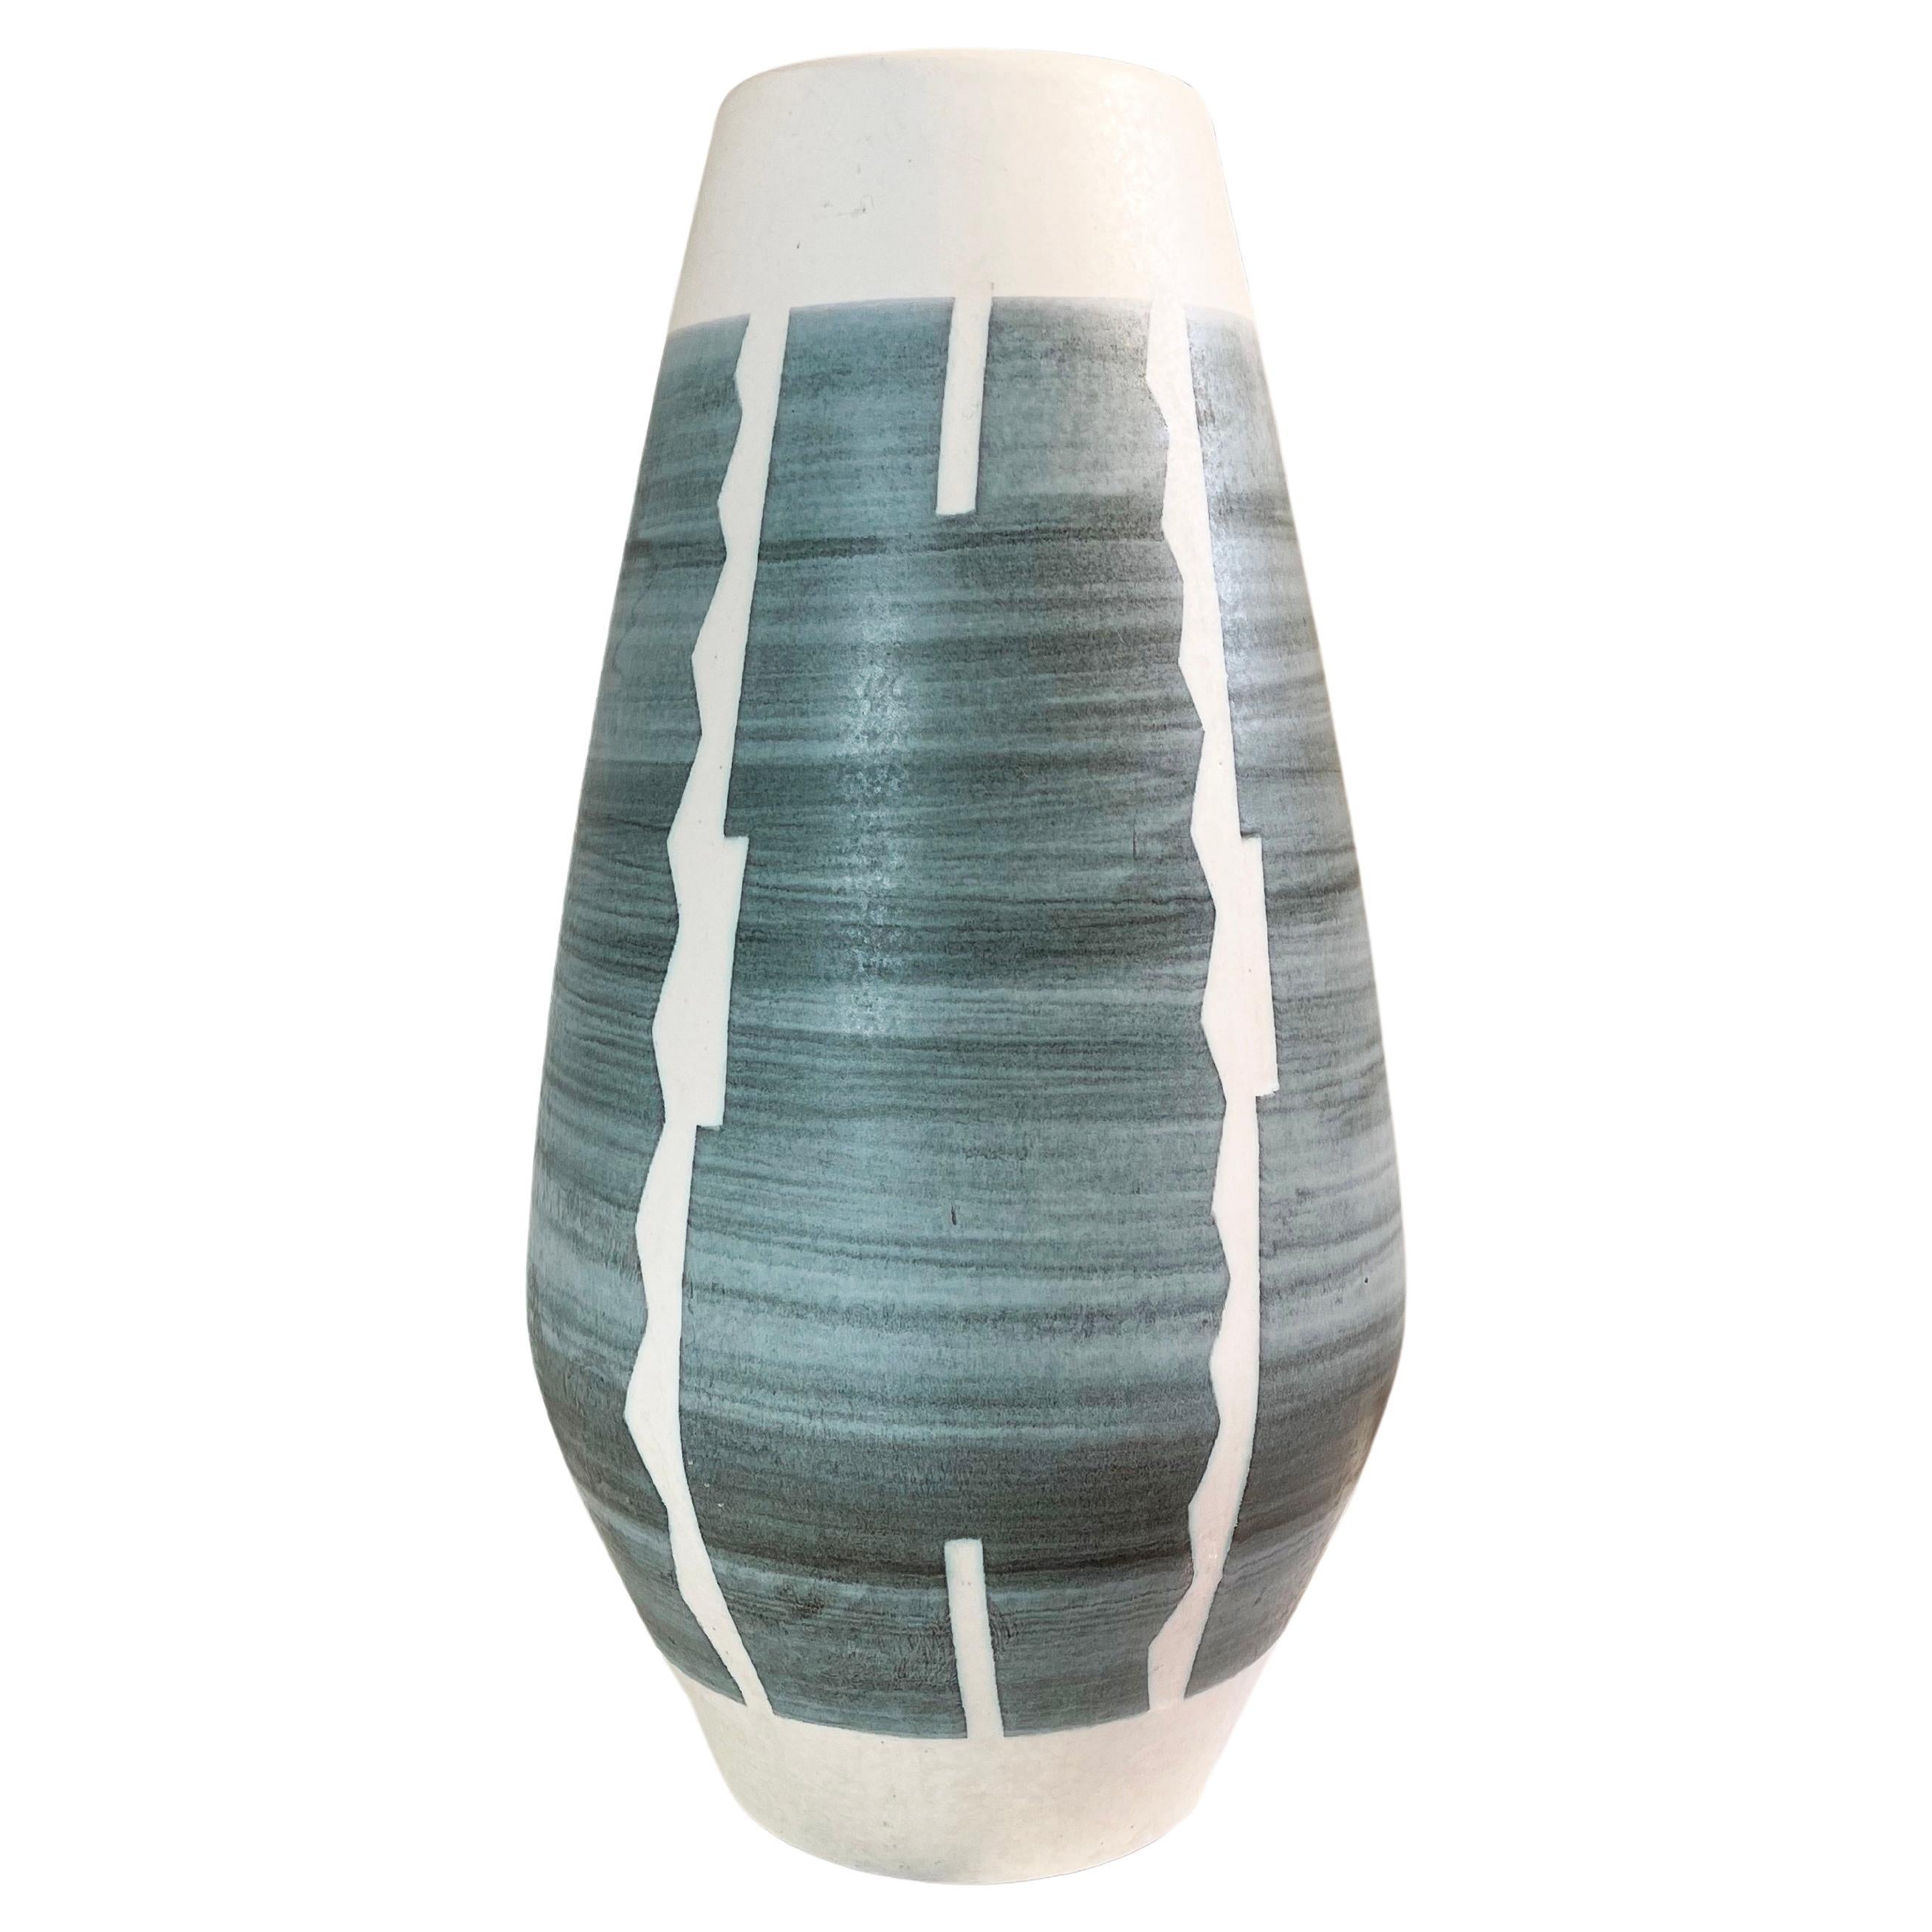 Large Modernist Ethnic Type West German Floor Vase by Fohr Pottery, circa 1965 For Sale